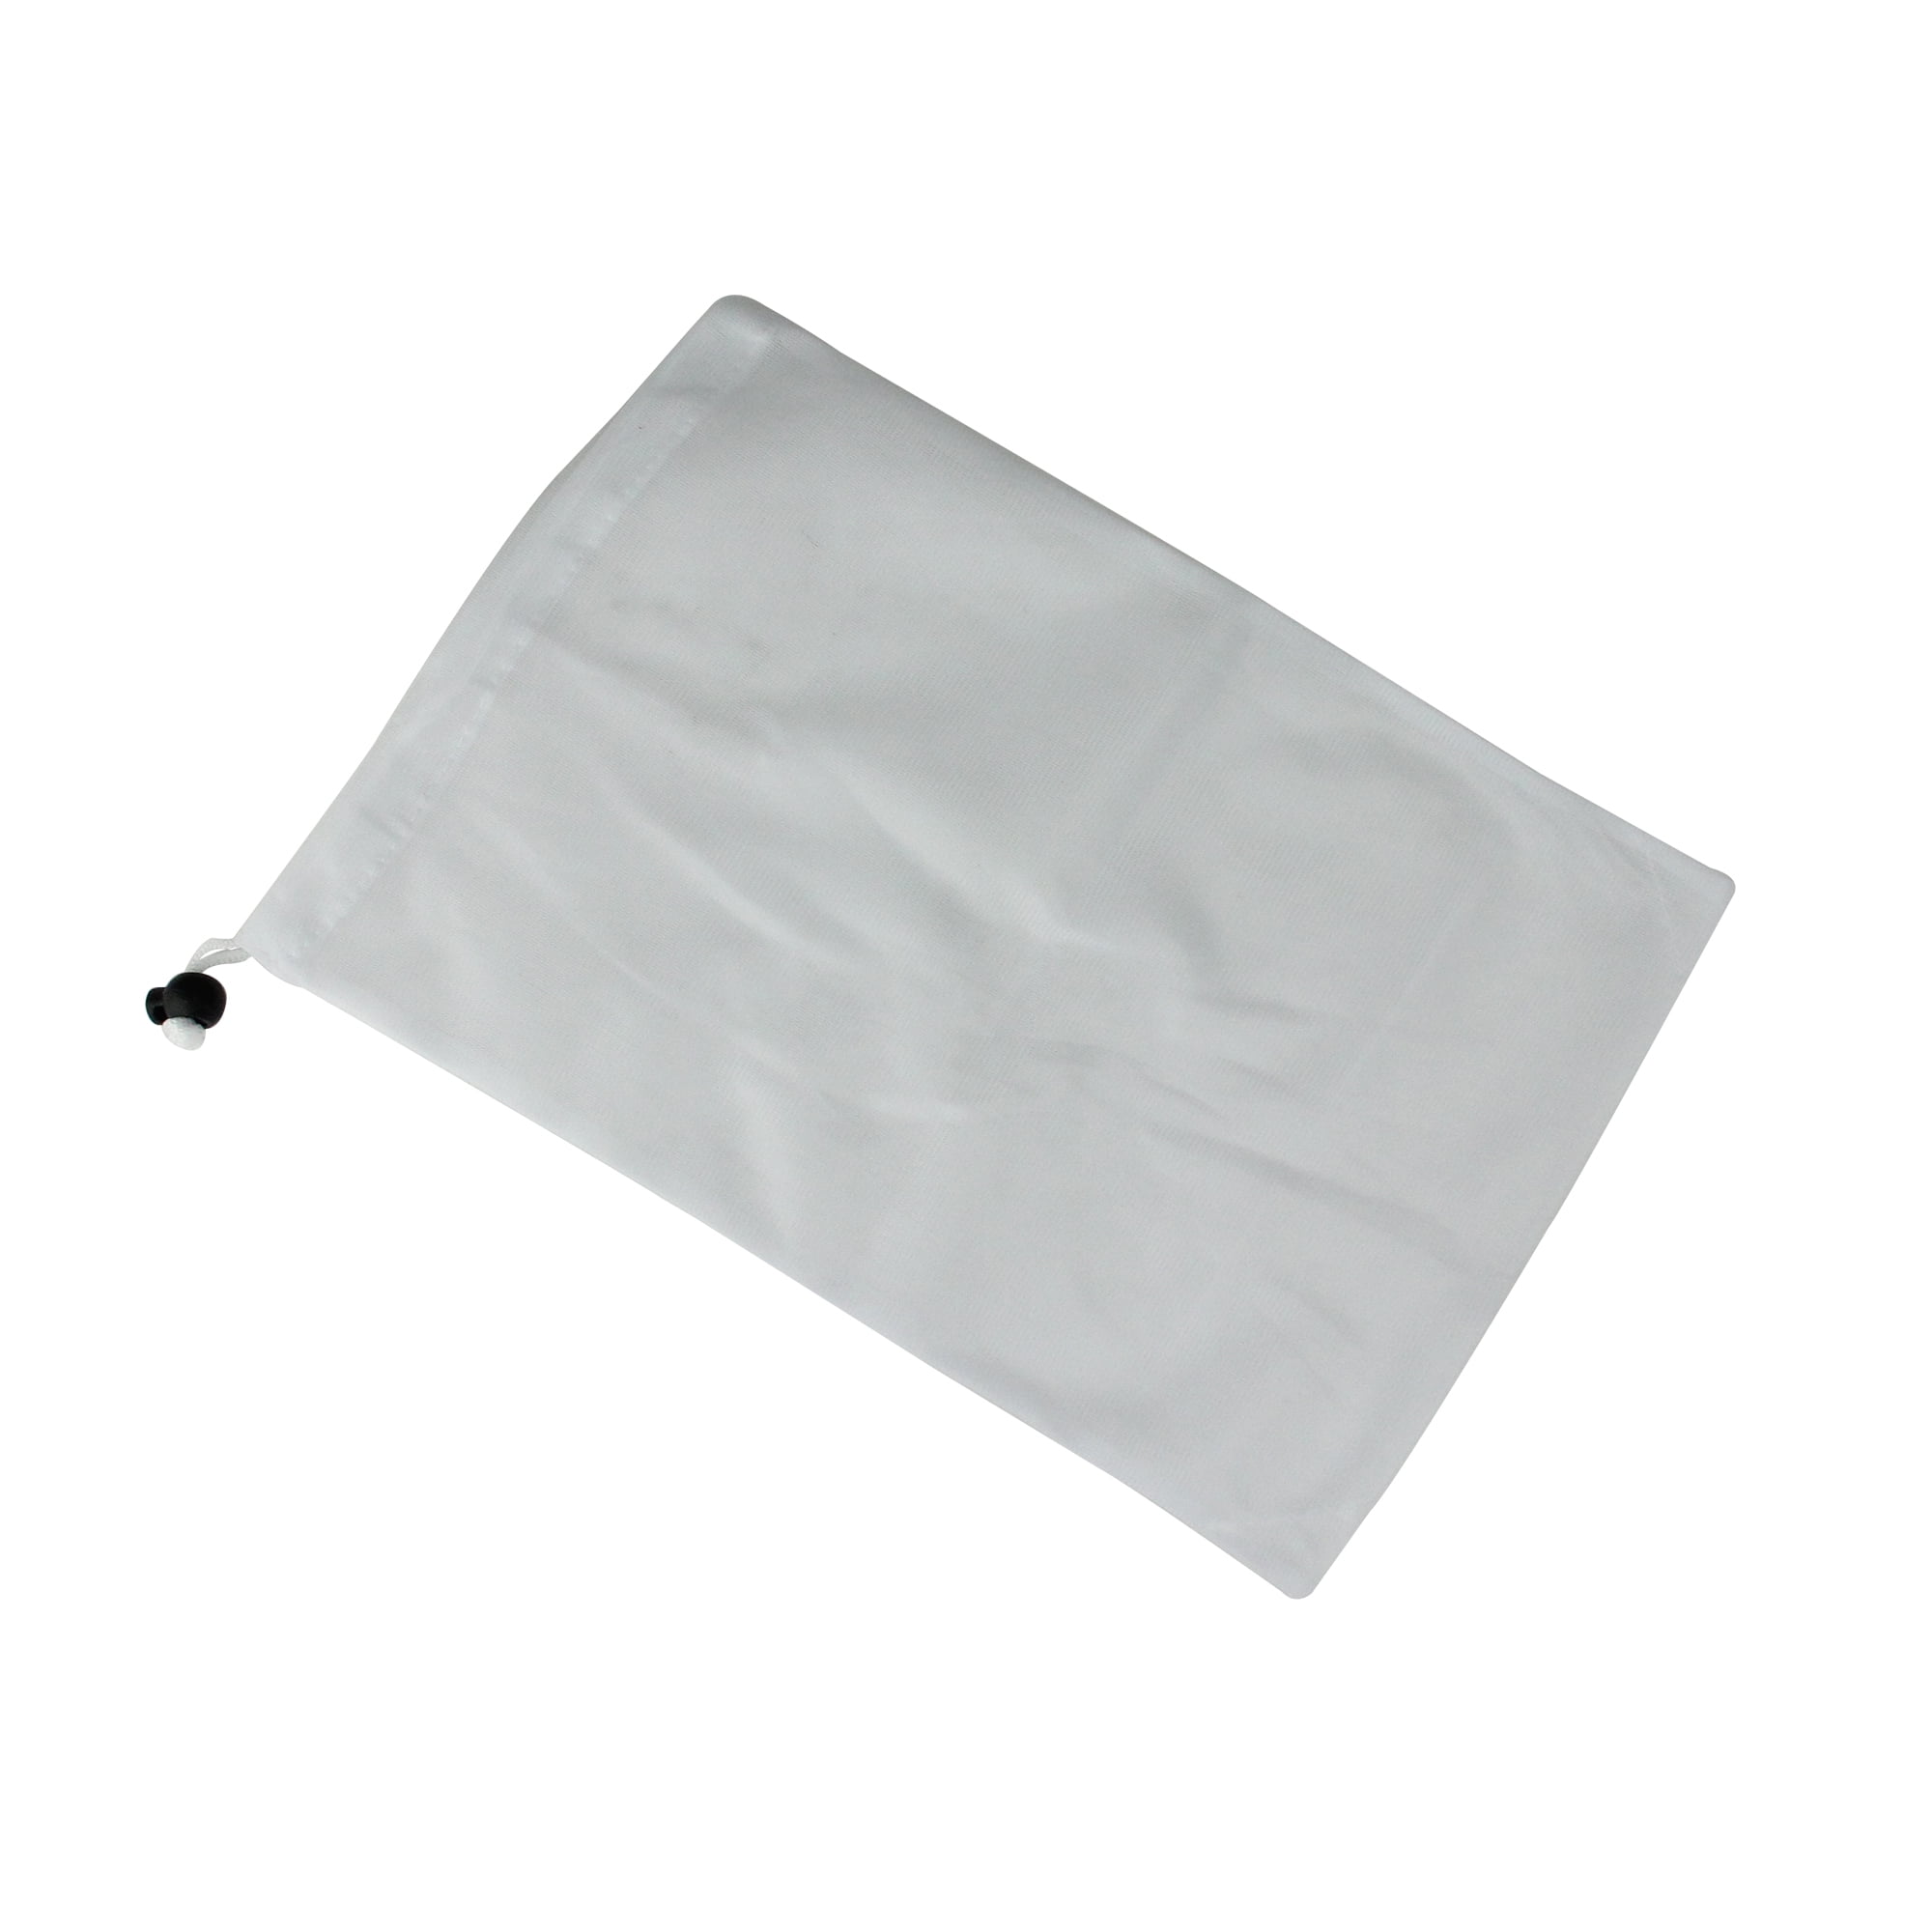 Lot of 2 x 25 Micron 4x8 Singed Polyester Felt Filter Bag PESP3S Size 3 